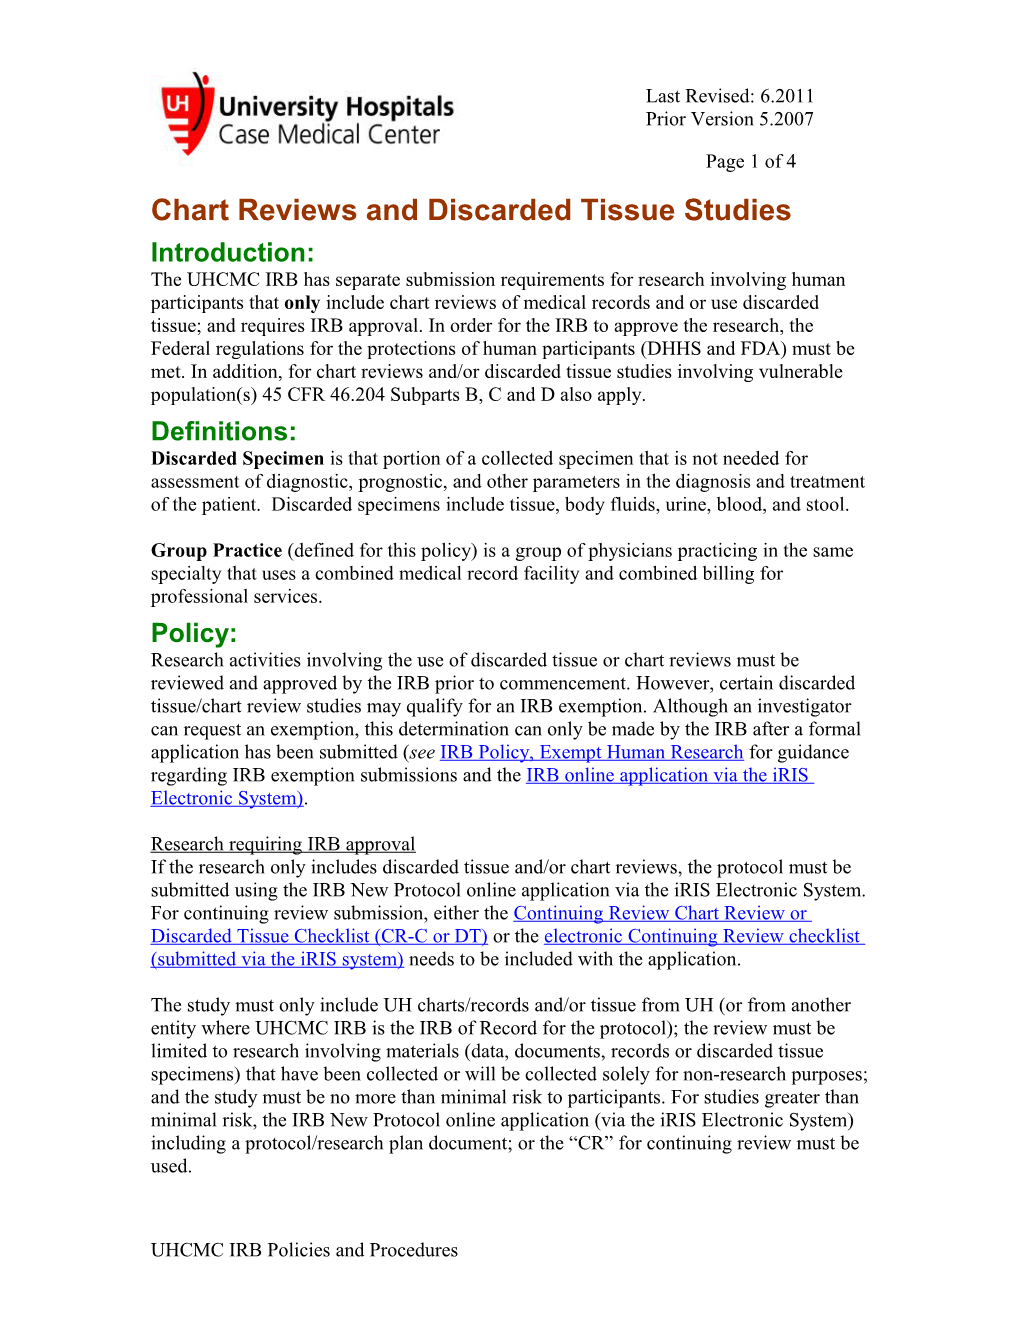 Chart Reviews and Discarded Tissue Studies